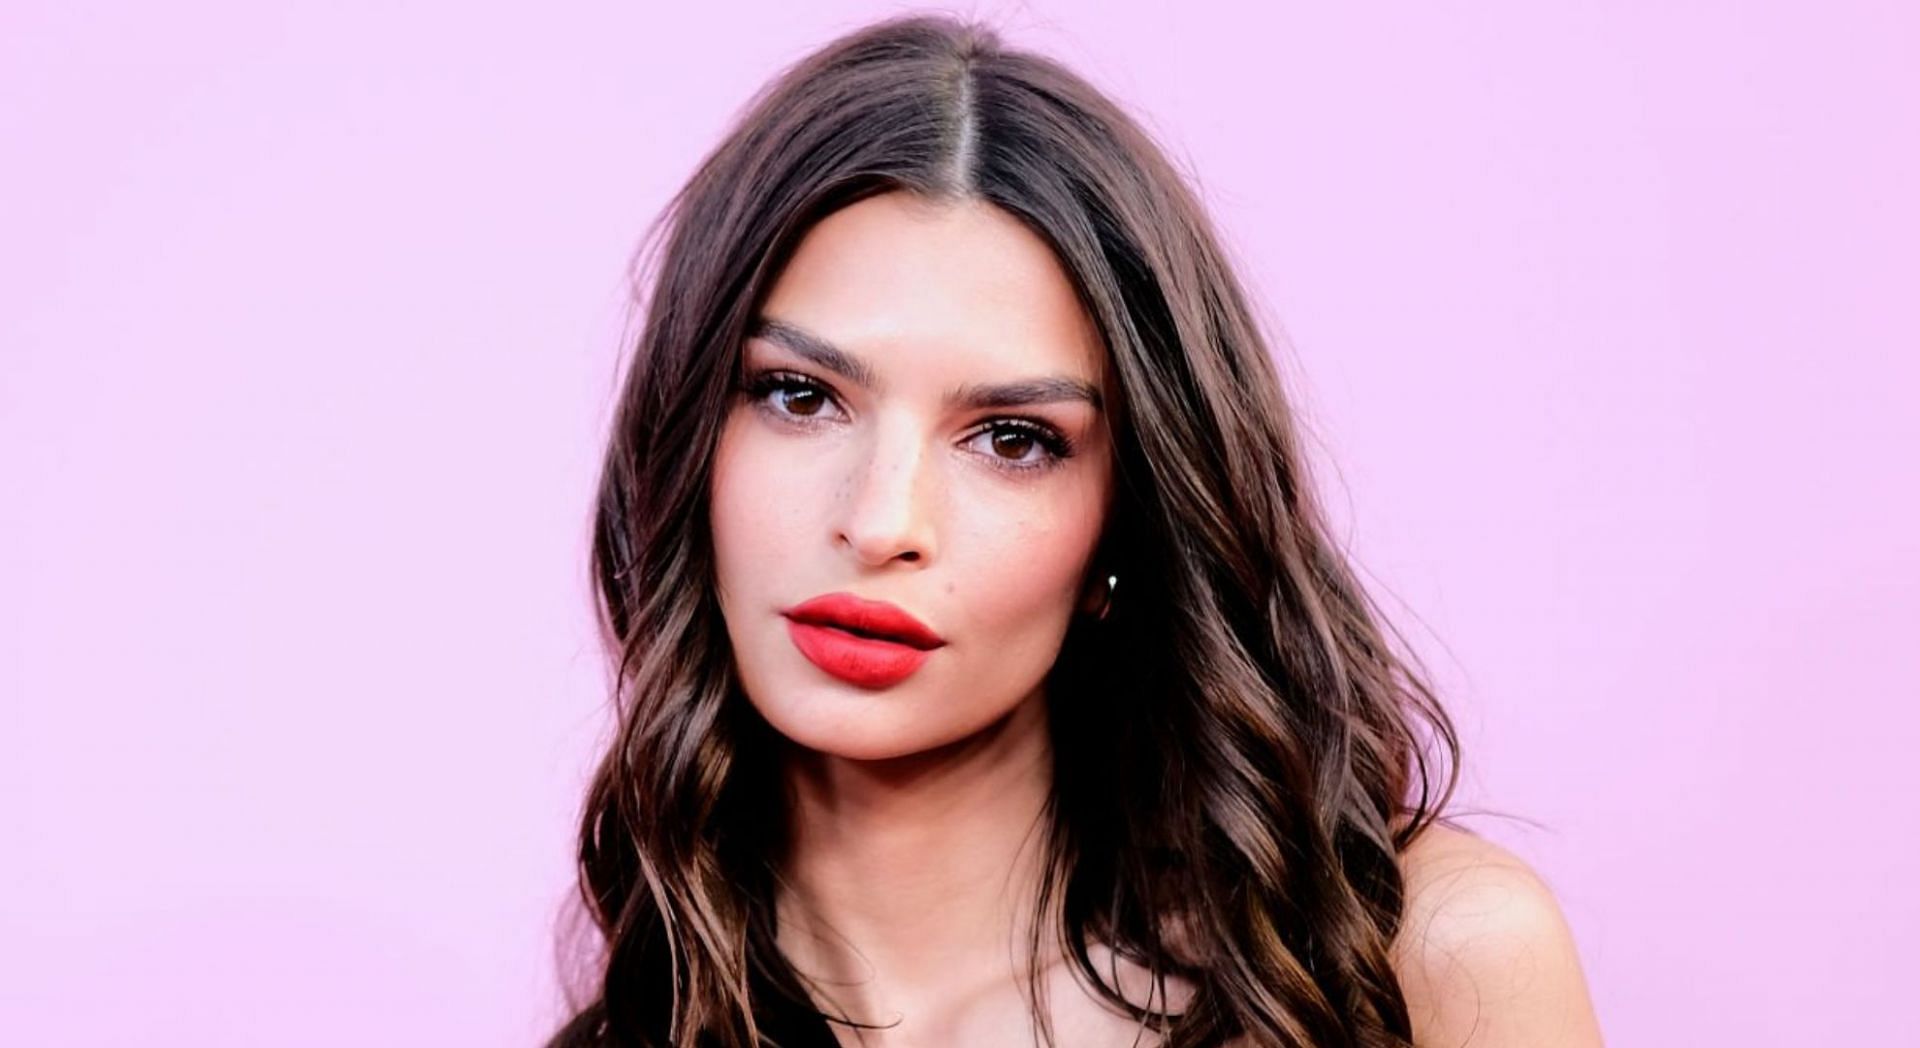 Emily Ratajkowski said she usually attracts &quot;worst men&quot; (Image via Getty Images)